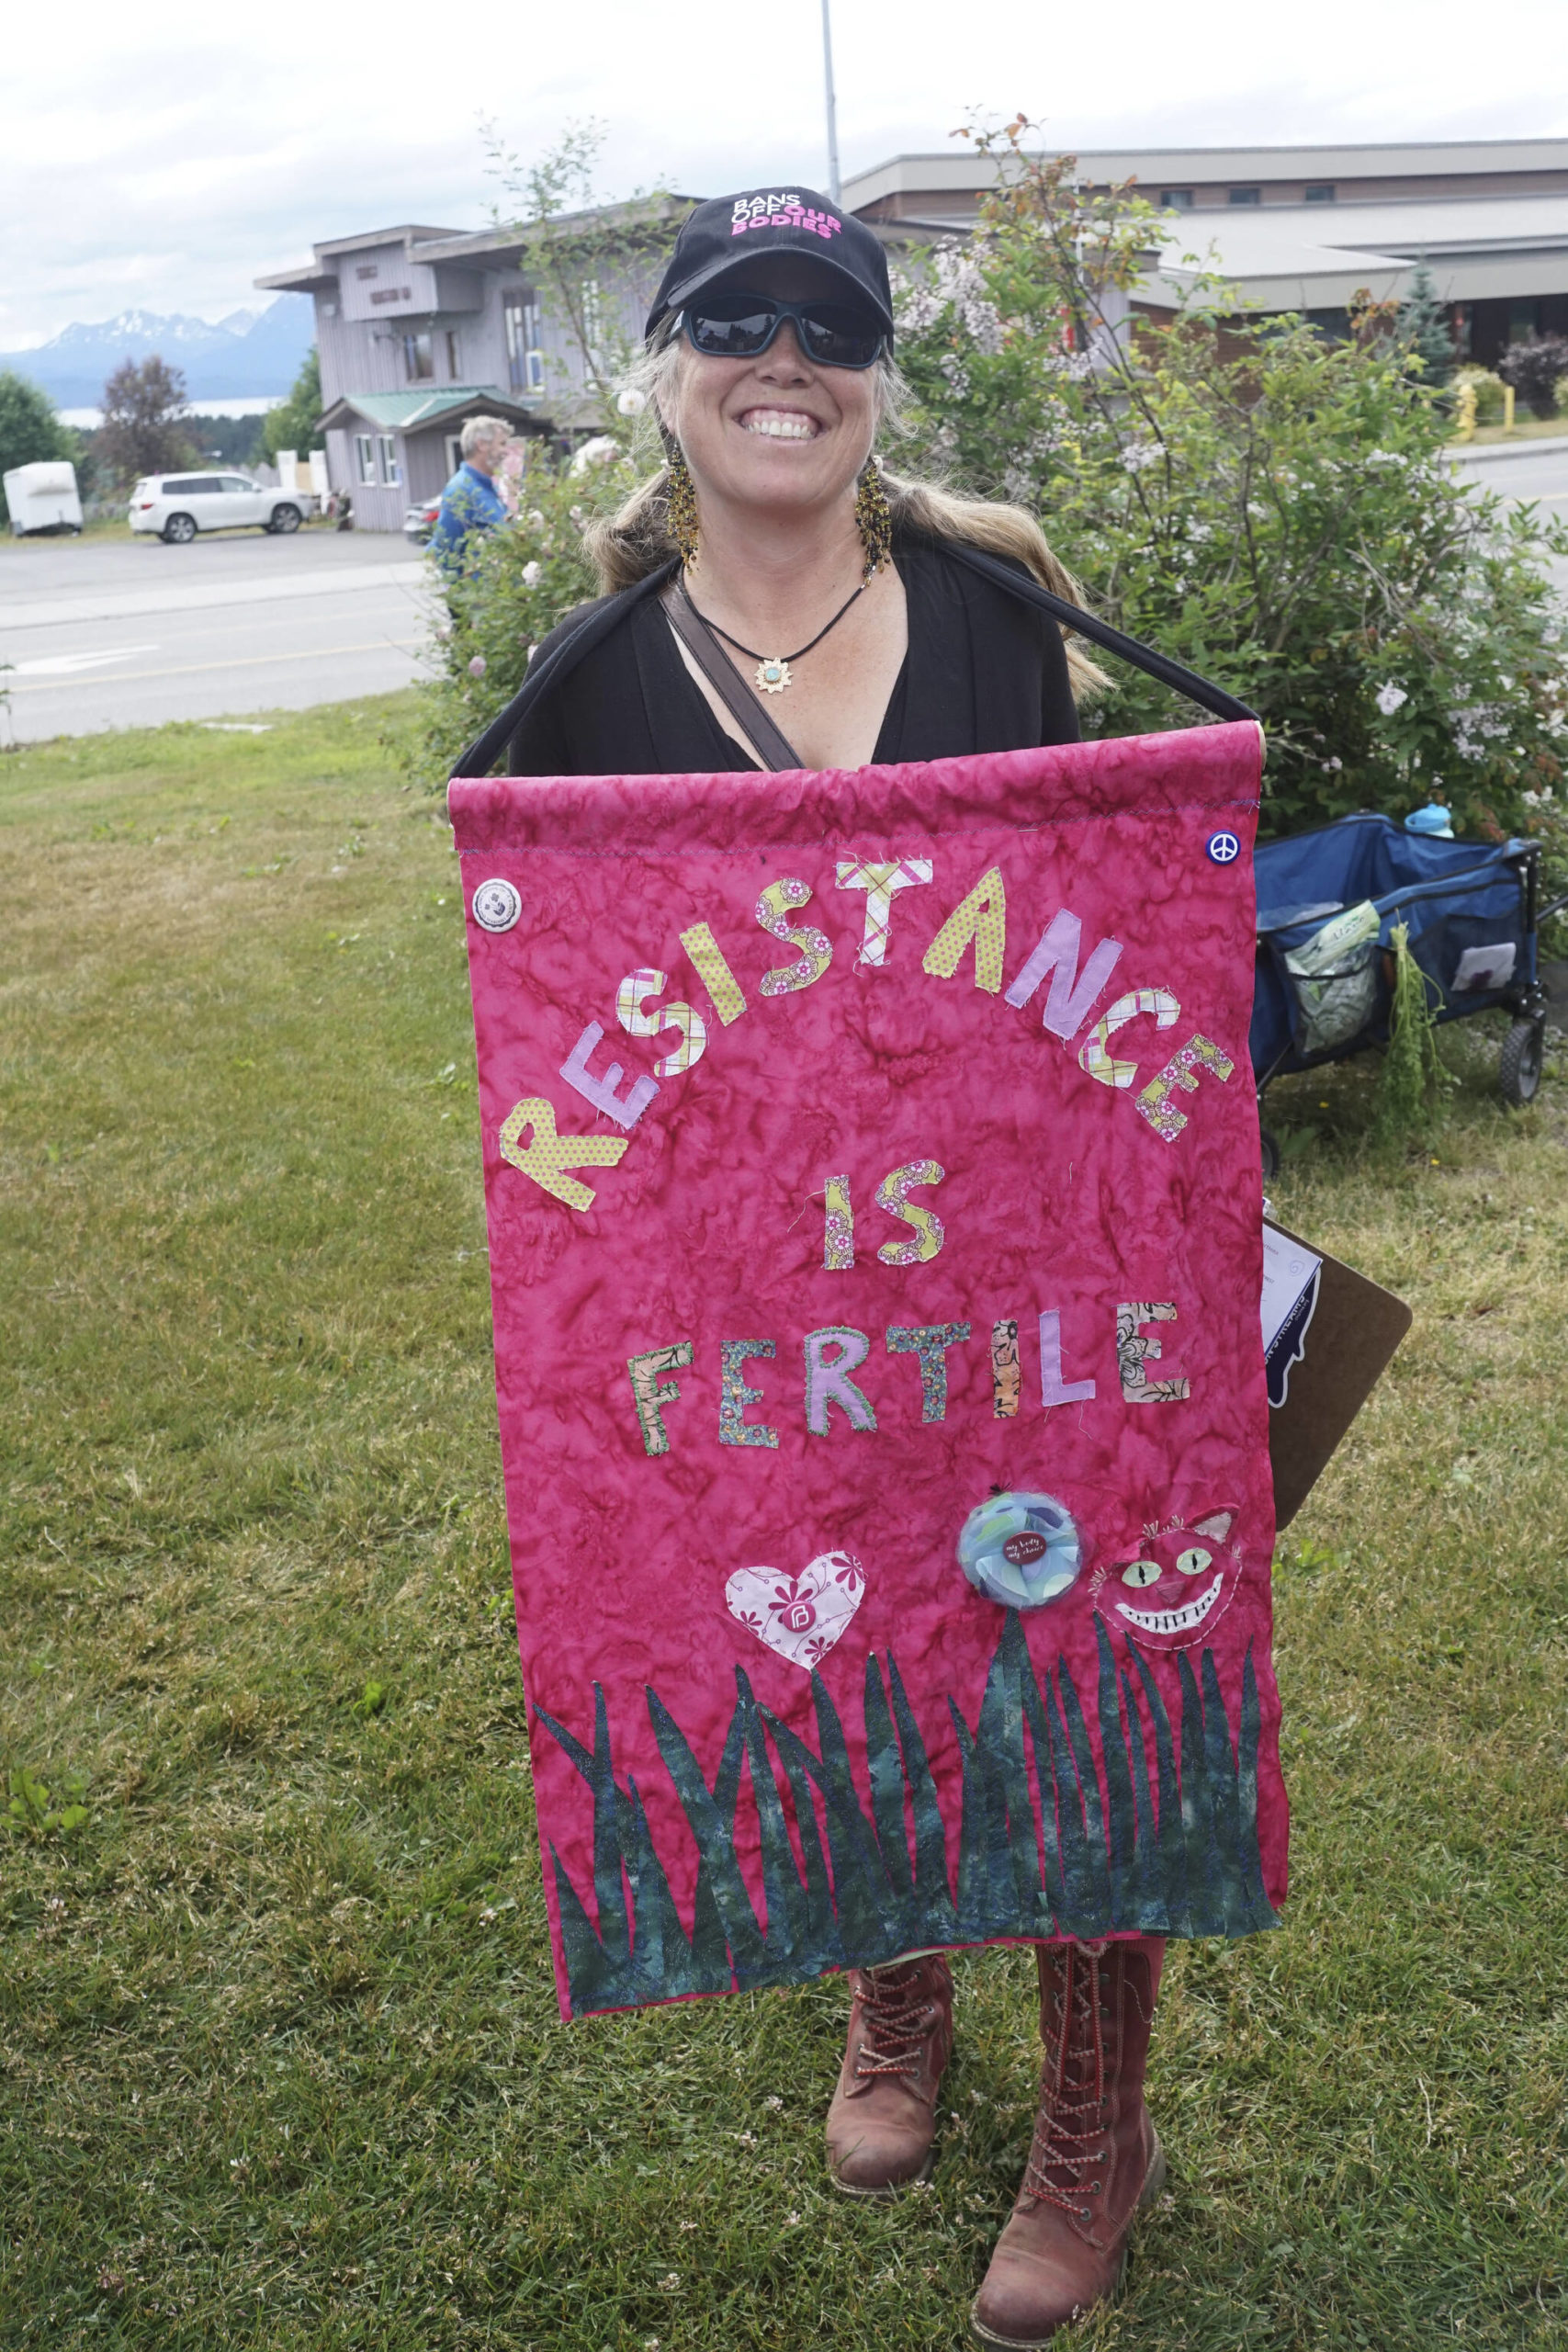 Carly Wier holds a sign that reads "Resistance is Fertile" at the "Women's March: Bans Off Our Bodies" protest on Saturday, July 9, 2022, at WKFL Park in Homer, Alaska. (Photo by Michael Armstrong/Homer News)